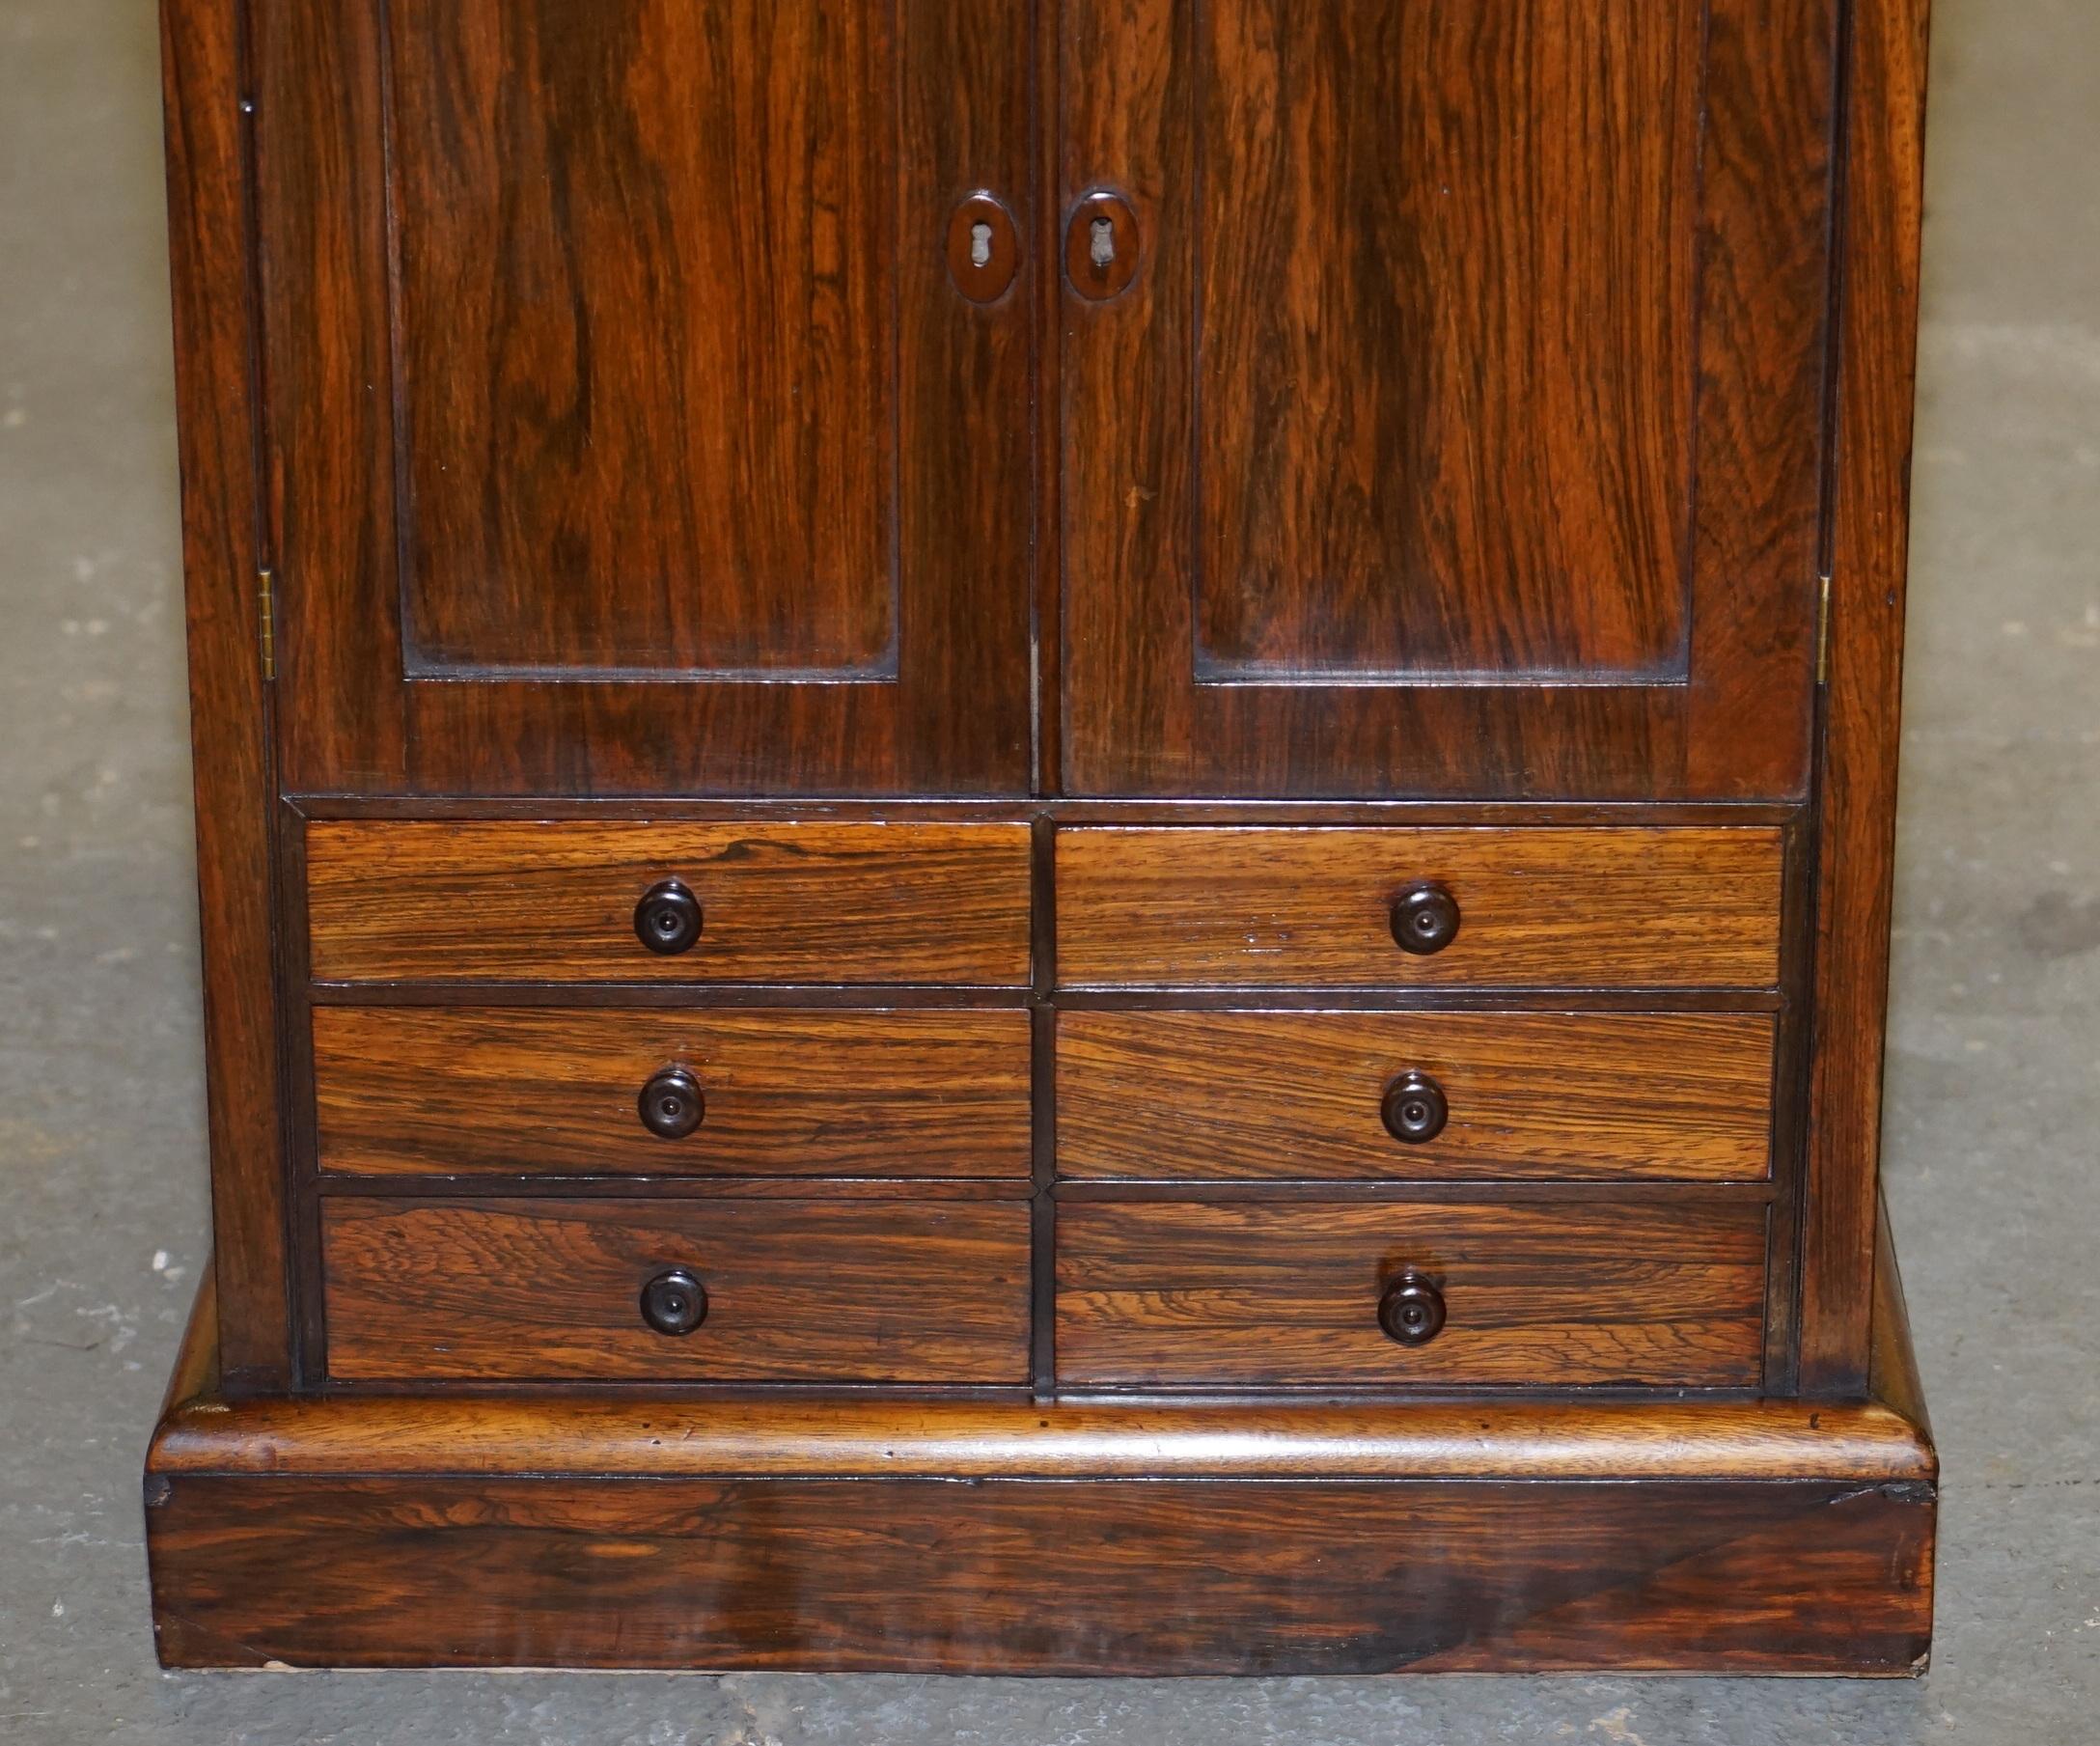 RARE WILLIAM IV CIRCA 1830 HARDWOOD LIBRARY FOLIO CABiNET WITH DRAWERS BOOKCASE For Sale 12